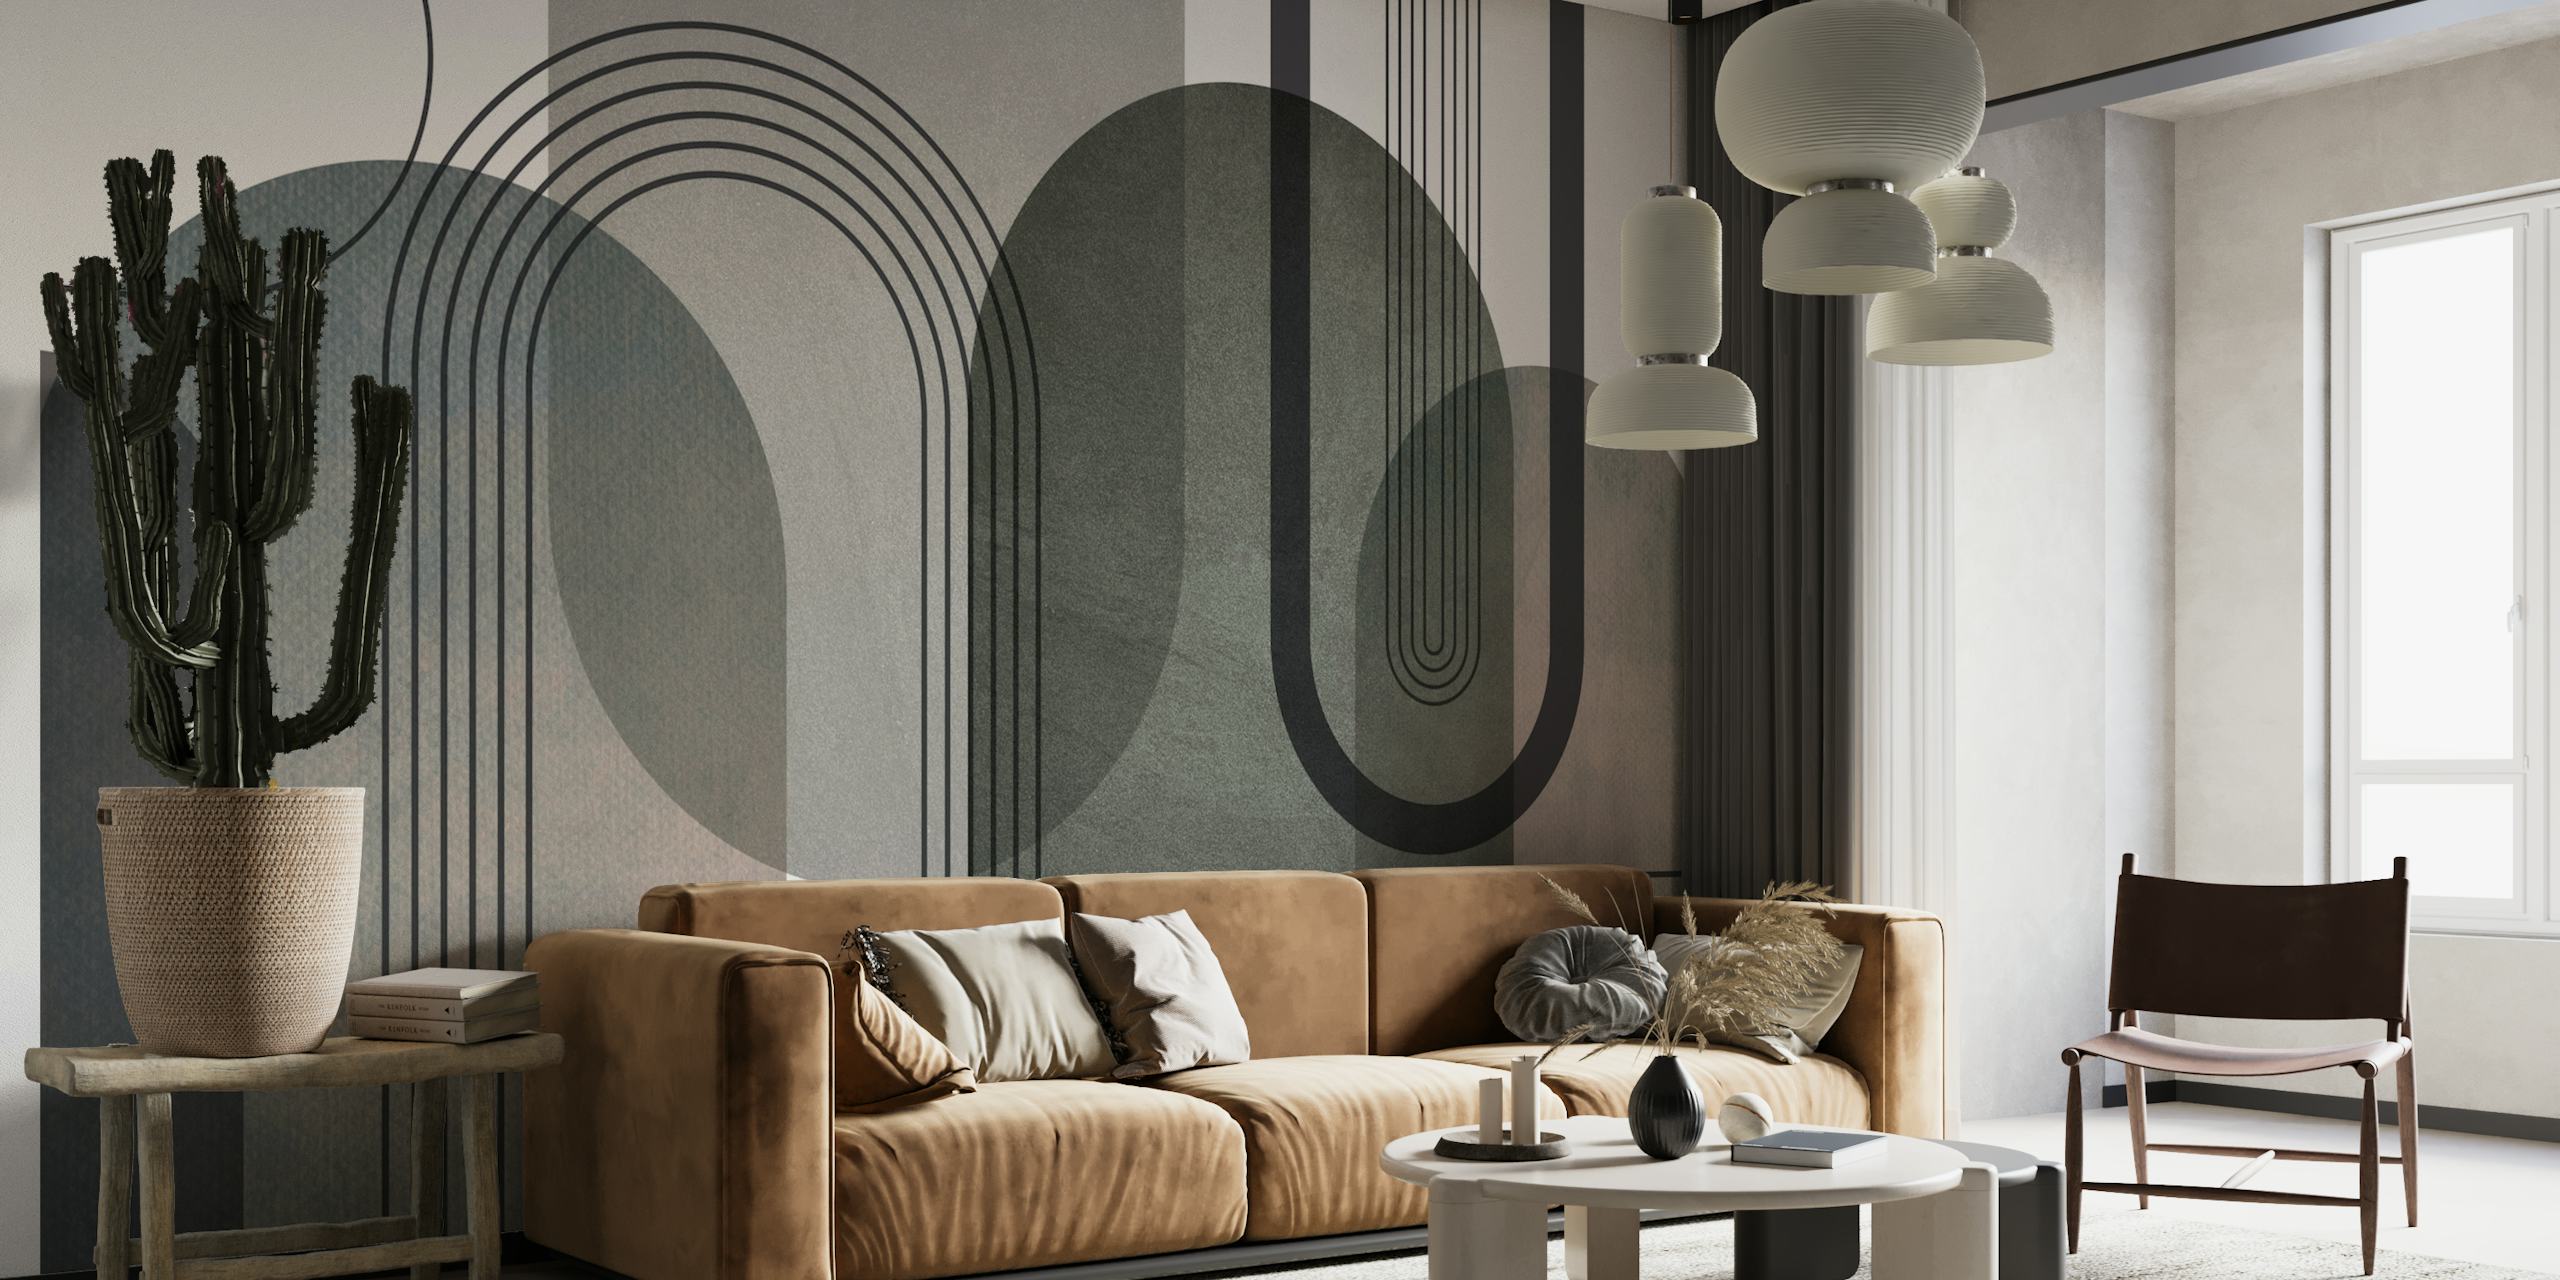 Abstract Arches in Muted Tones behang